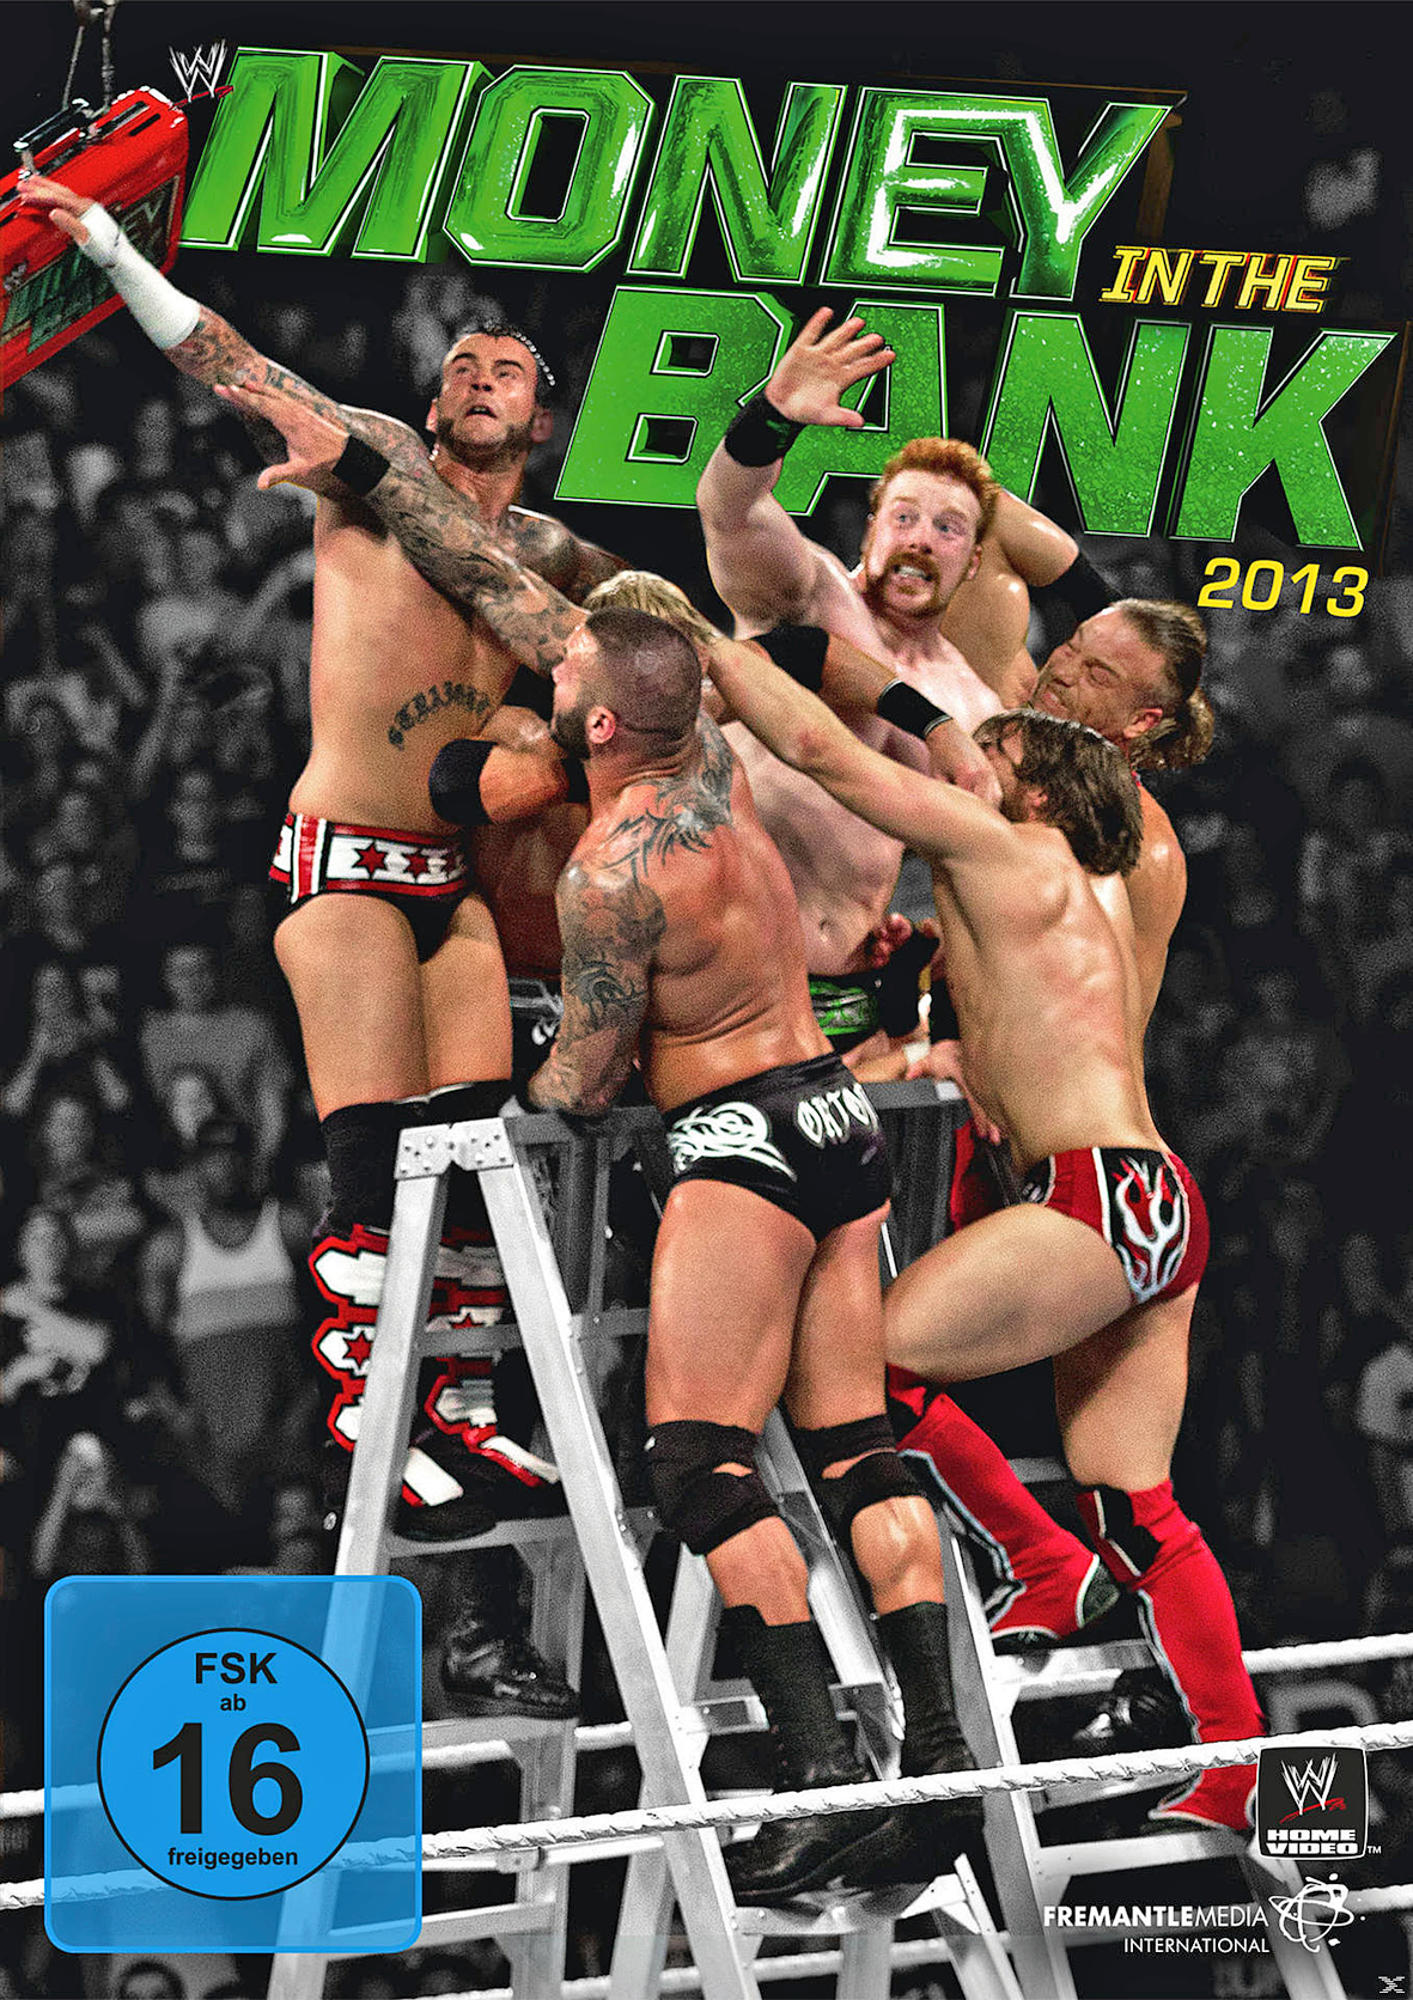 in the 2013 Bank DVD Money